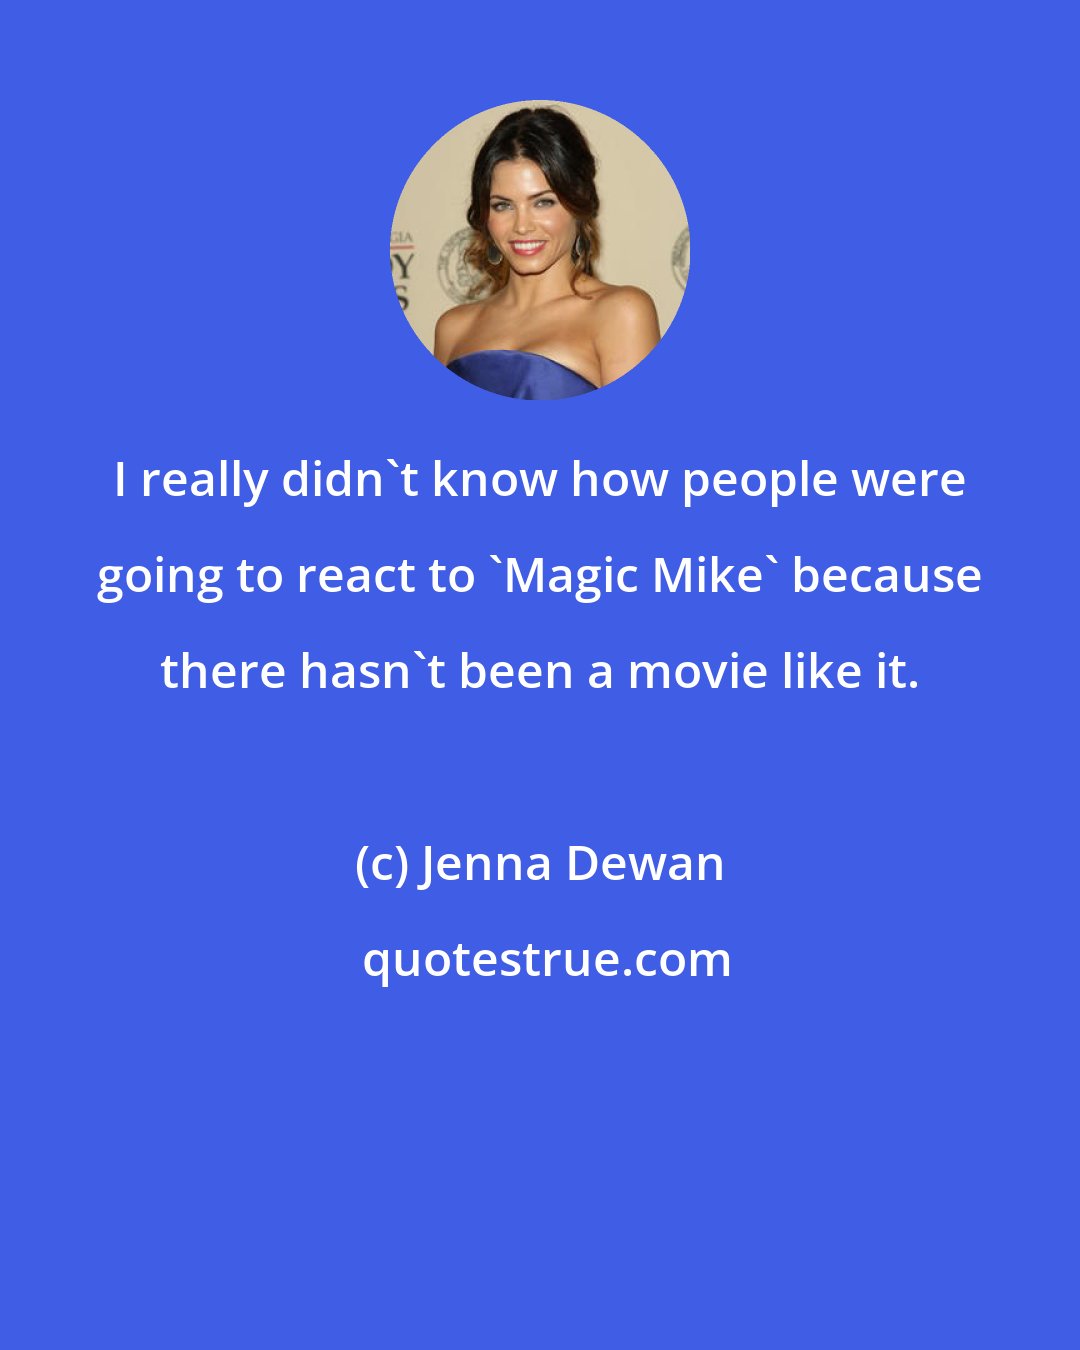 Jenna Dewan: I really didn't know how people were going to react to 'Magic Mike' because there hasn't been a movie like it.